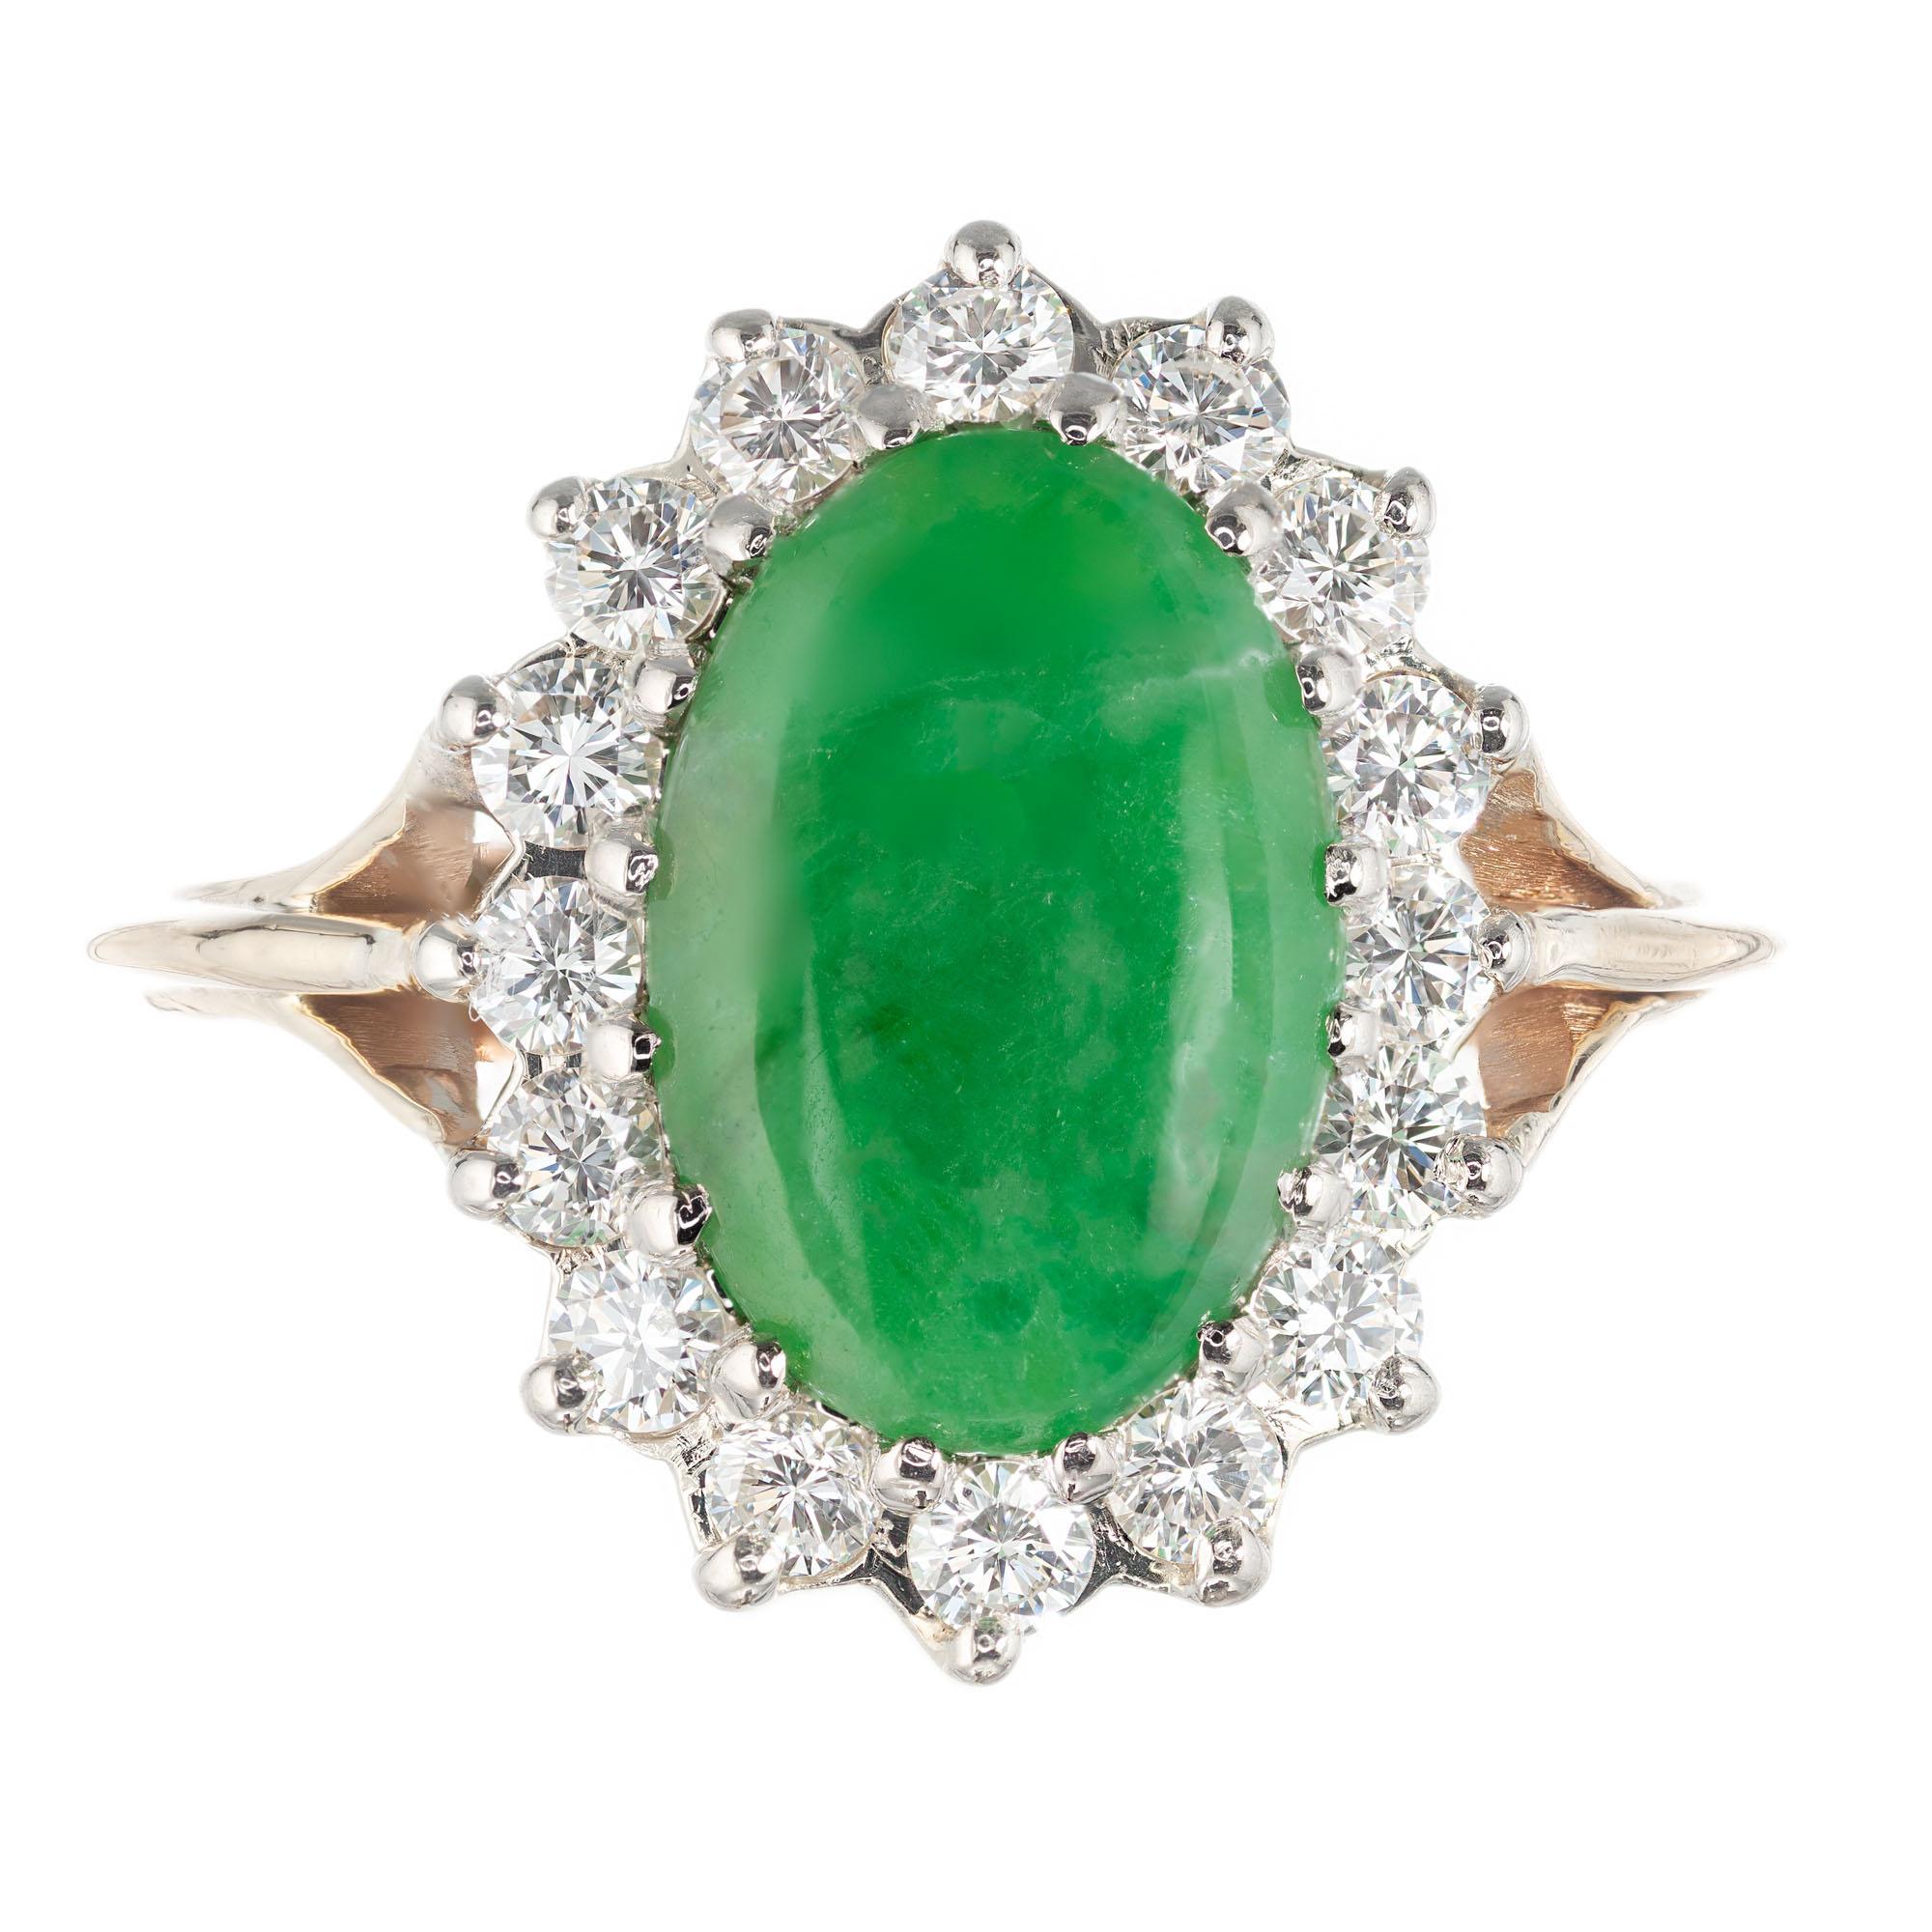 GIA certified A grade natural untreated Jadeite Jade ring with a halo of 16 round cut diamonds in a 14k yellow gold handmade setting.

1 11.60 x 8.60 x 2.05mm translucent Jadeite Jade natural green color no enhancements. GIA certificate #